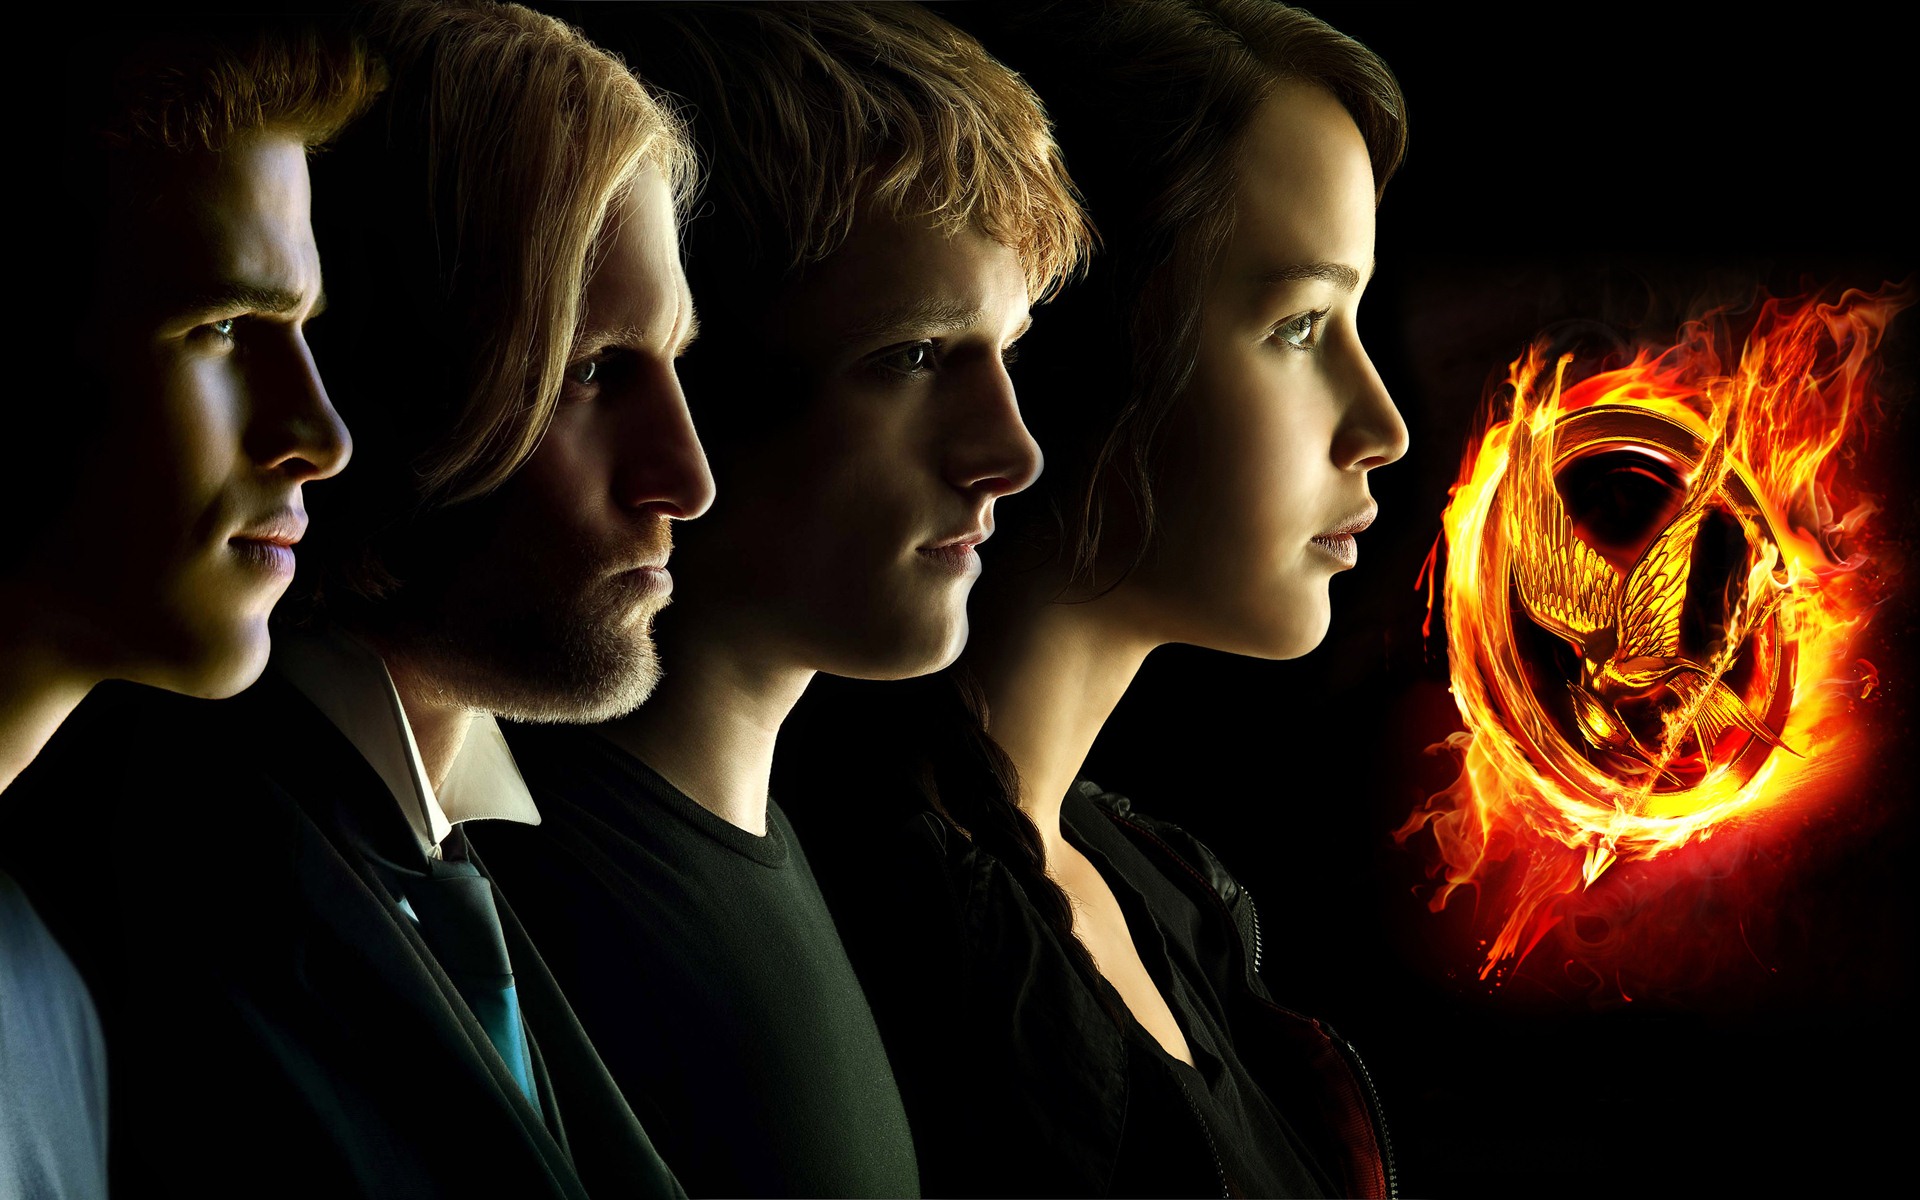 The Hunger Games HD wallpapers #9 - 1920x1200